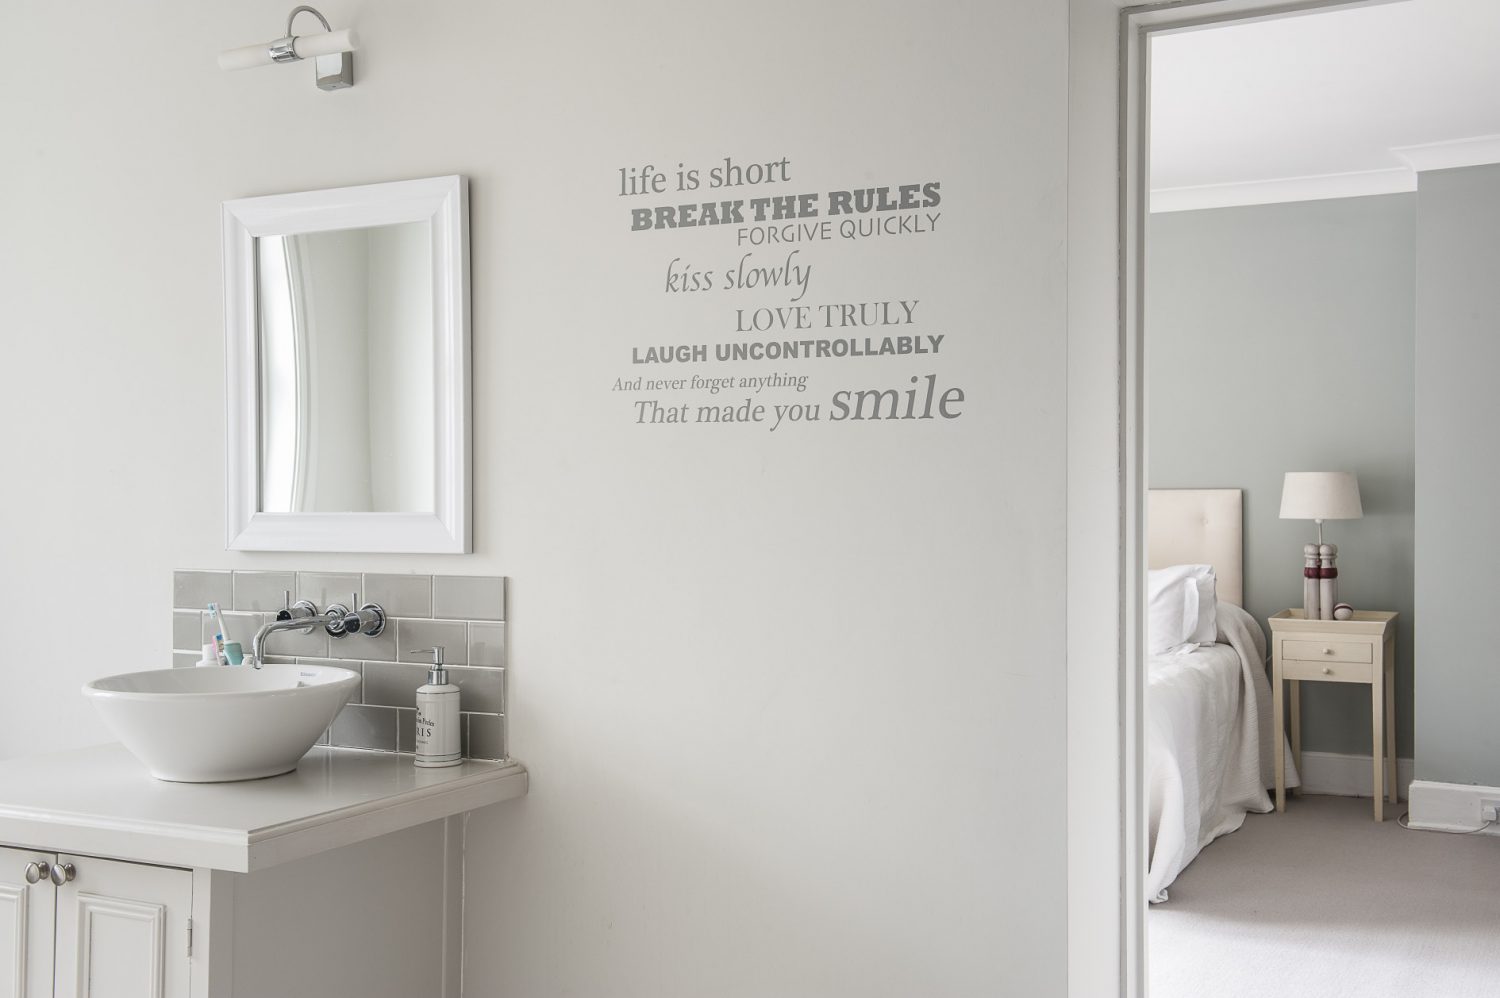 A third Jack and Jill bathroom is shared by a guest room and Izzy